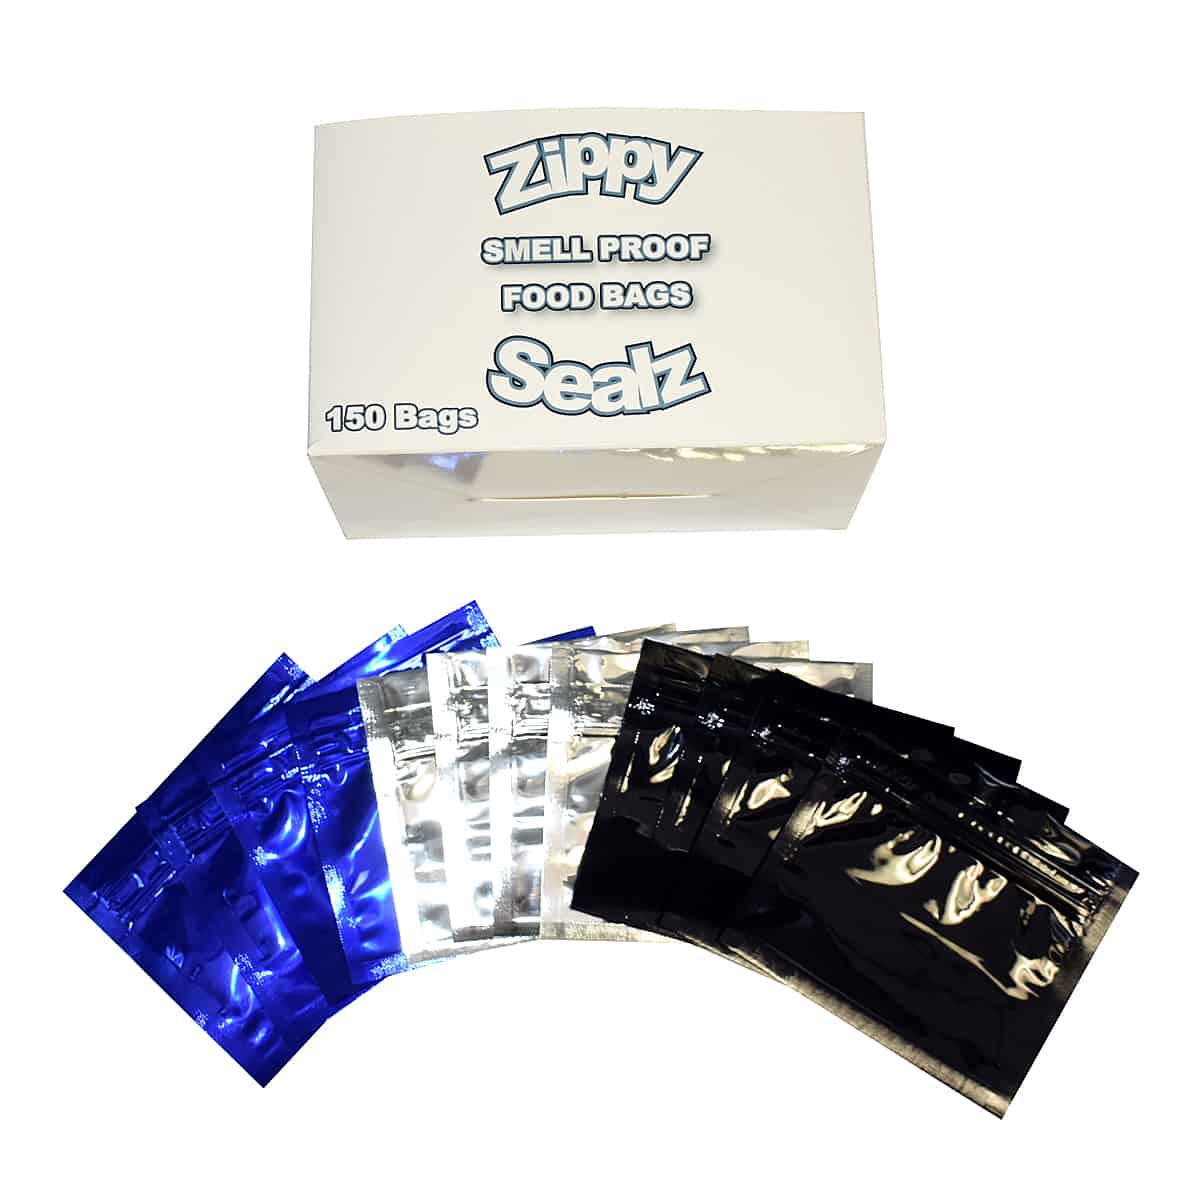 Zippy Sealz Smell Proof Retail Bags with Display Box  Medium Mixed Colour Bags  Silver  Blue  Bla